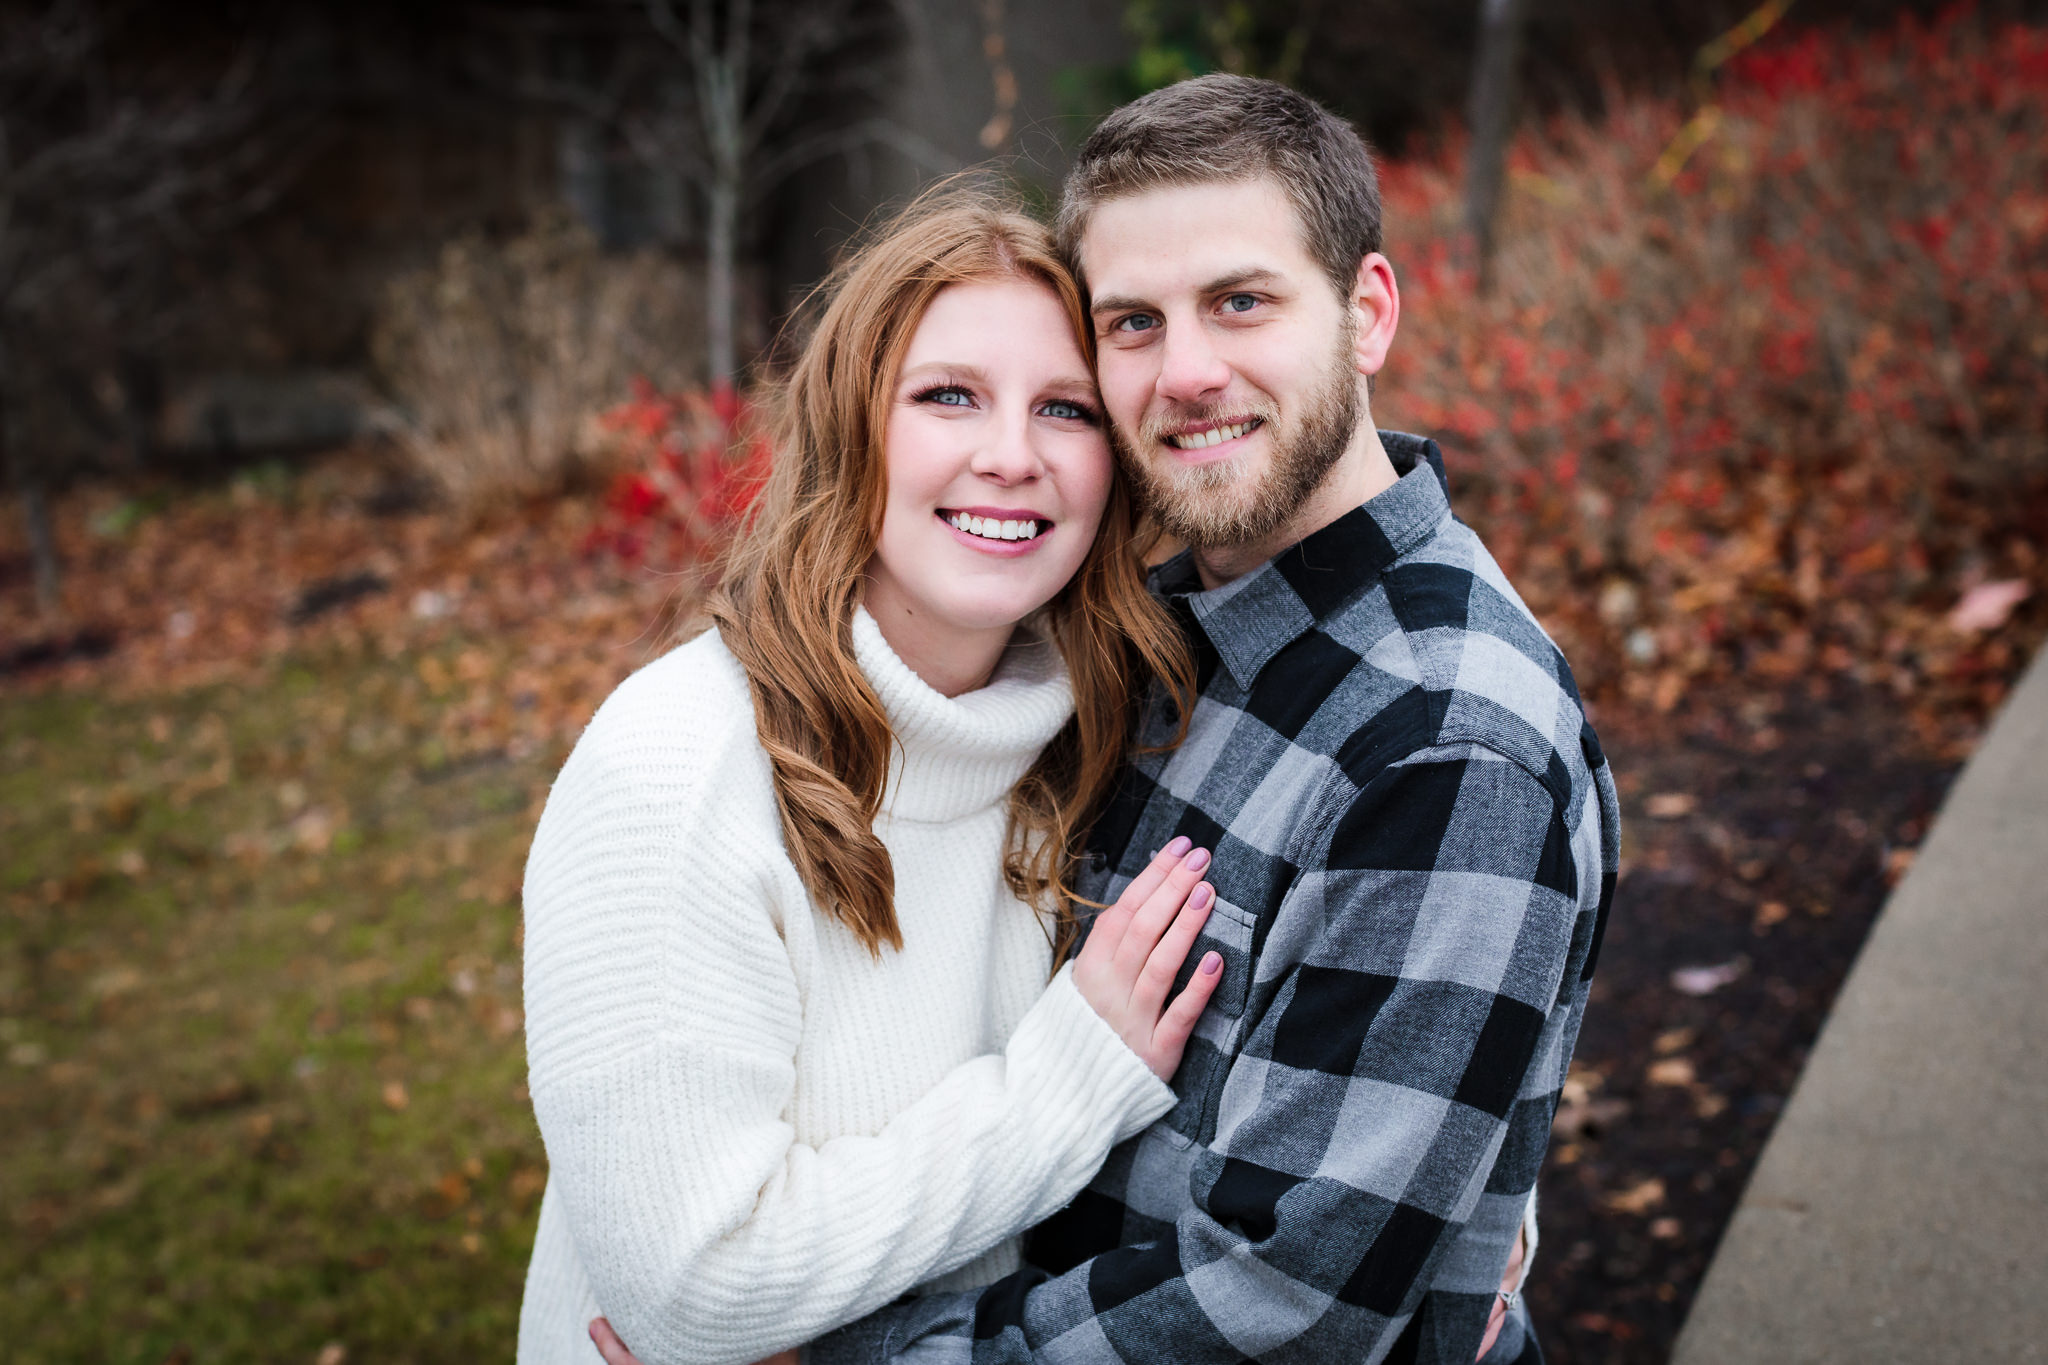 North Shore engagement session in December